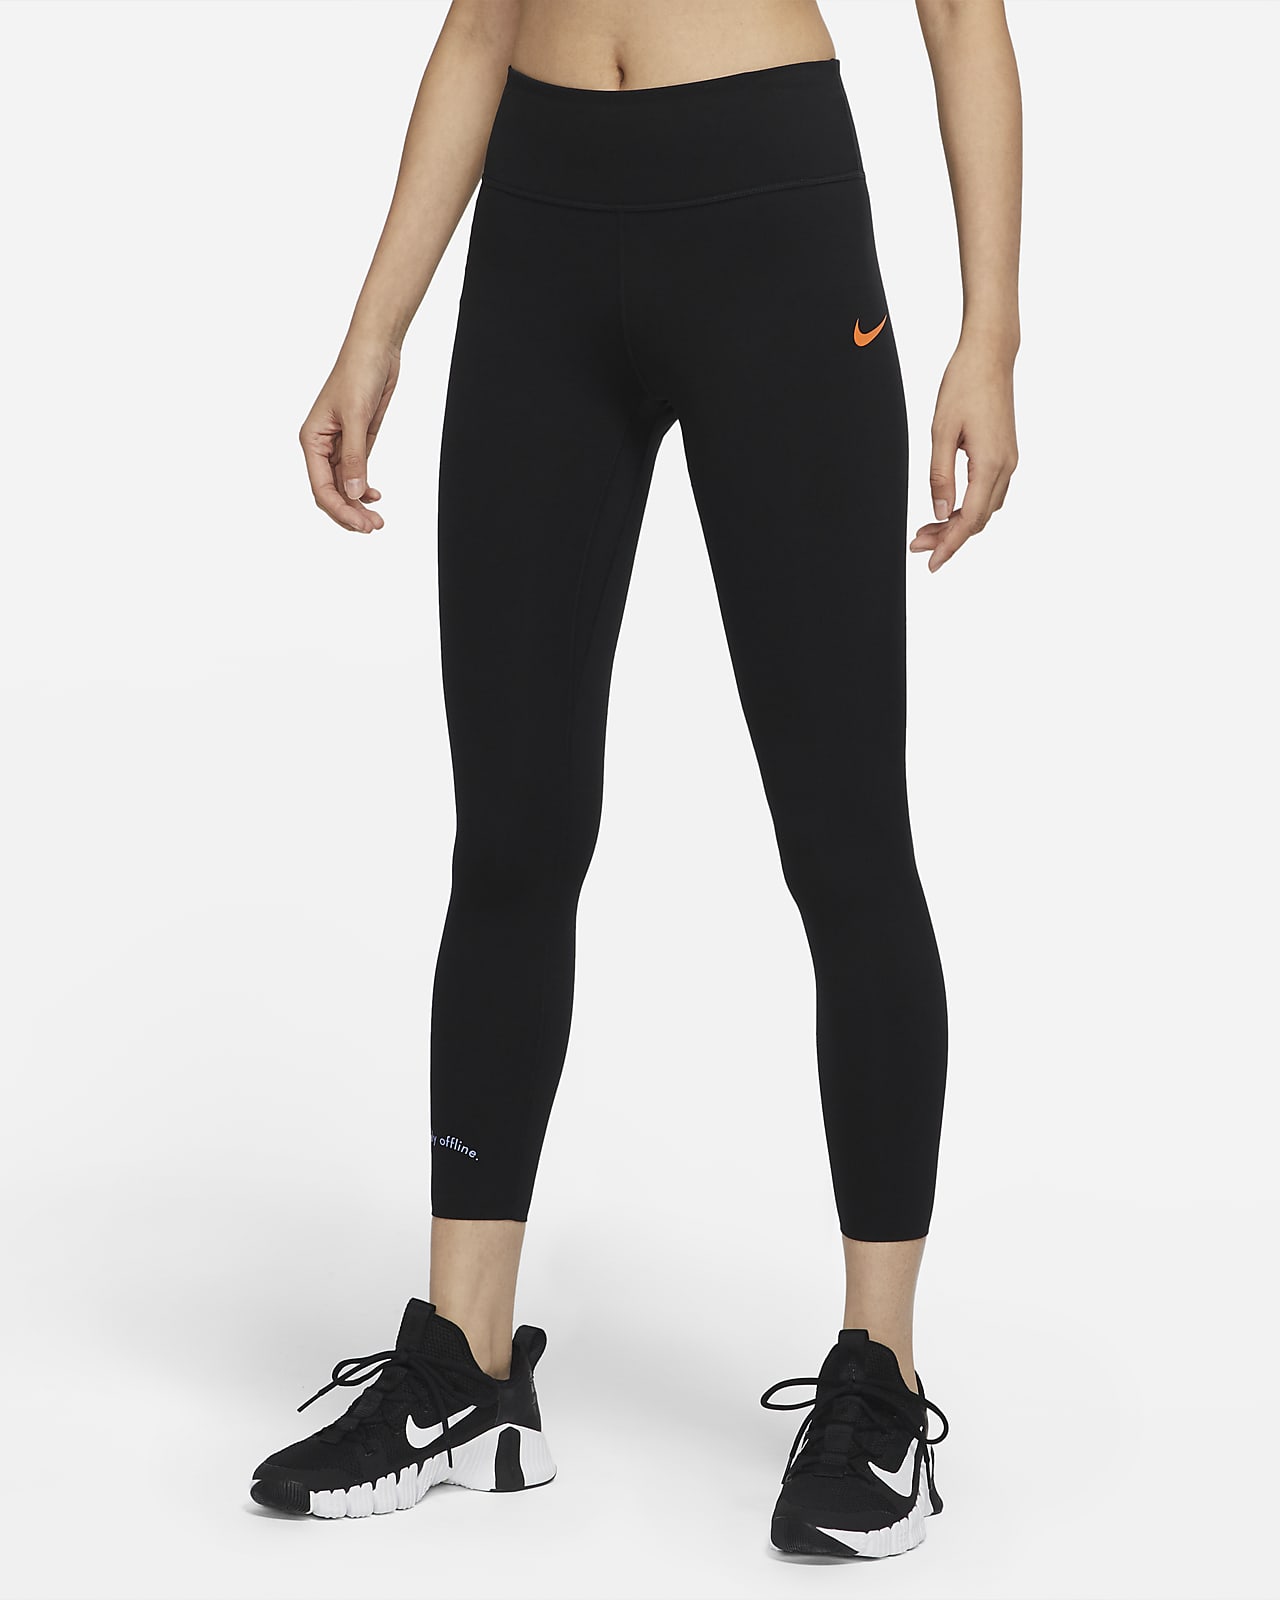 Nike Dri-FIT One Luxe 女子紧身裤